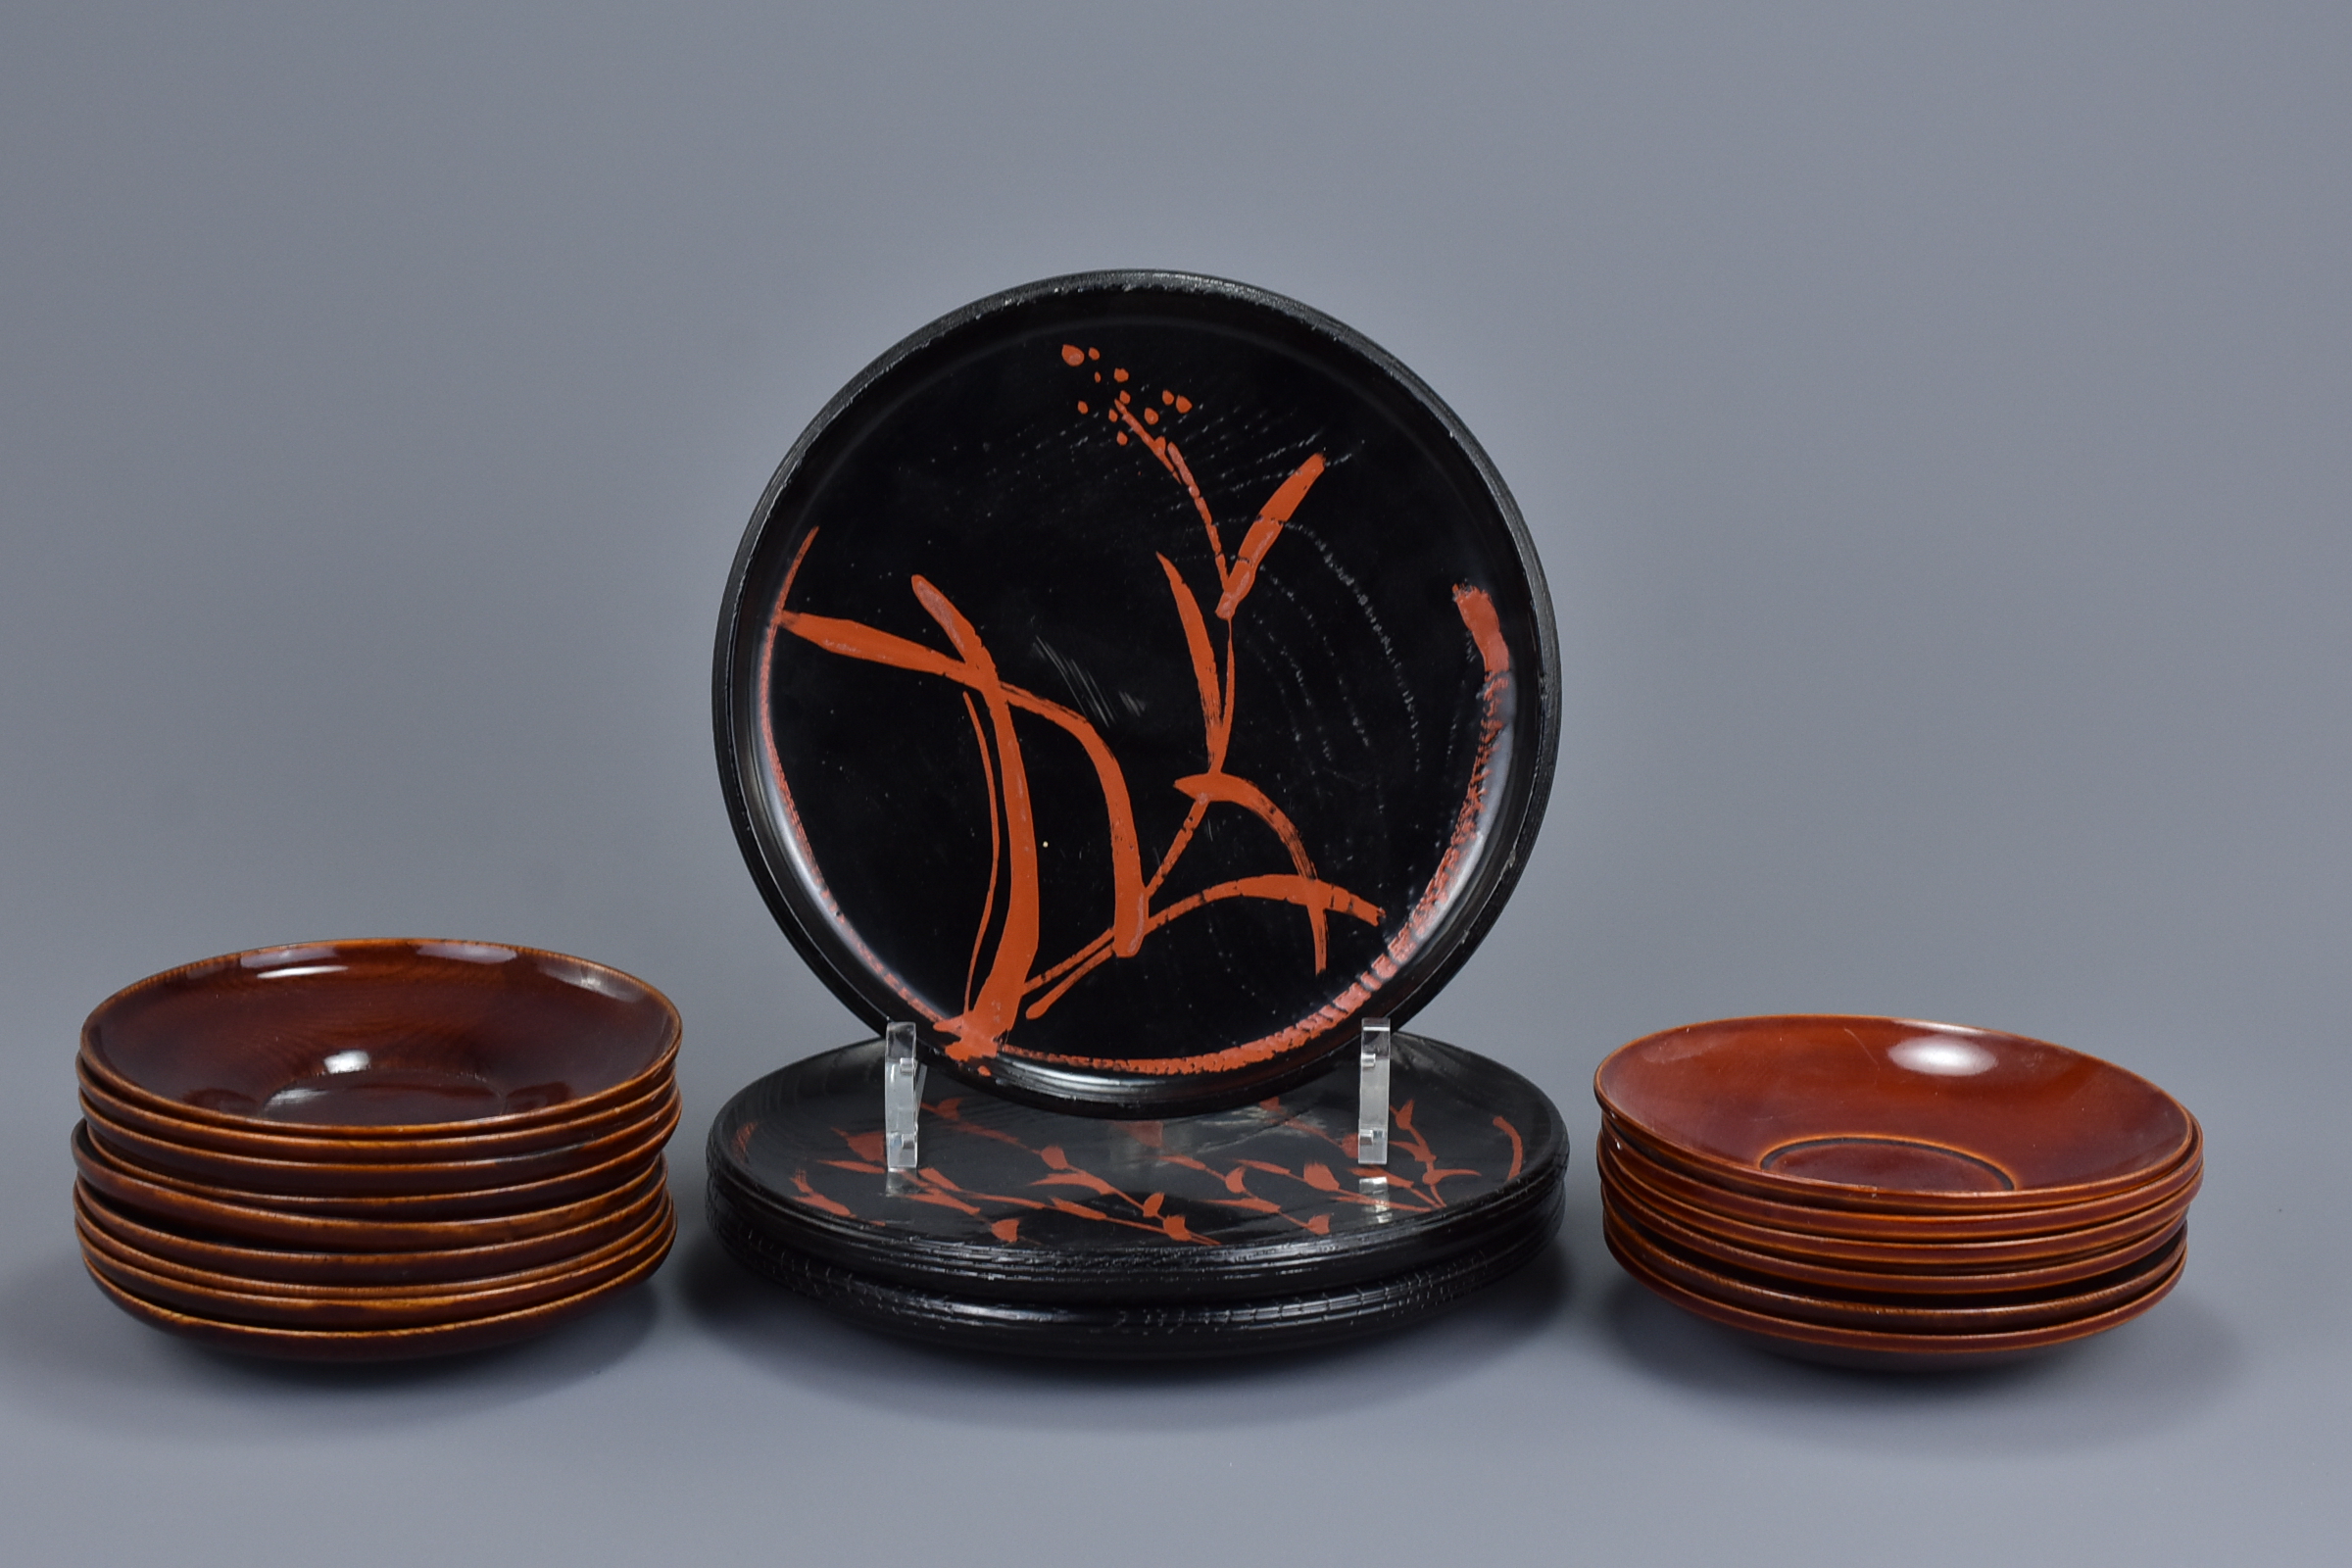 18 Japanese Lacquered Wood Dishes (3 Sets) - Image 3 of 3